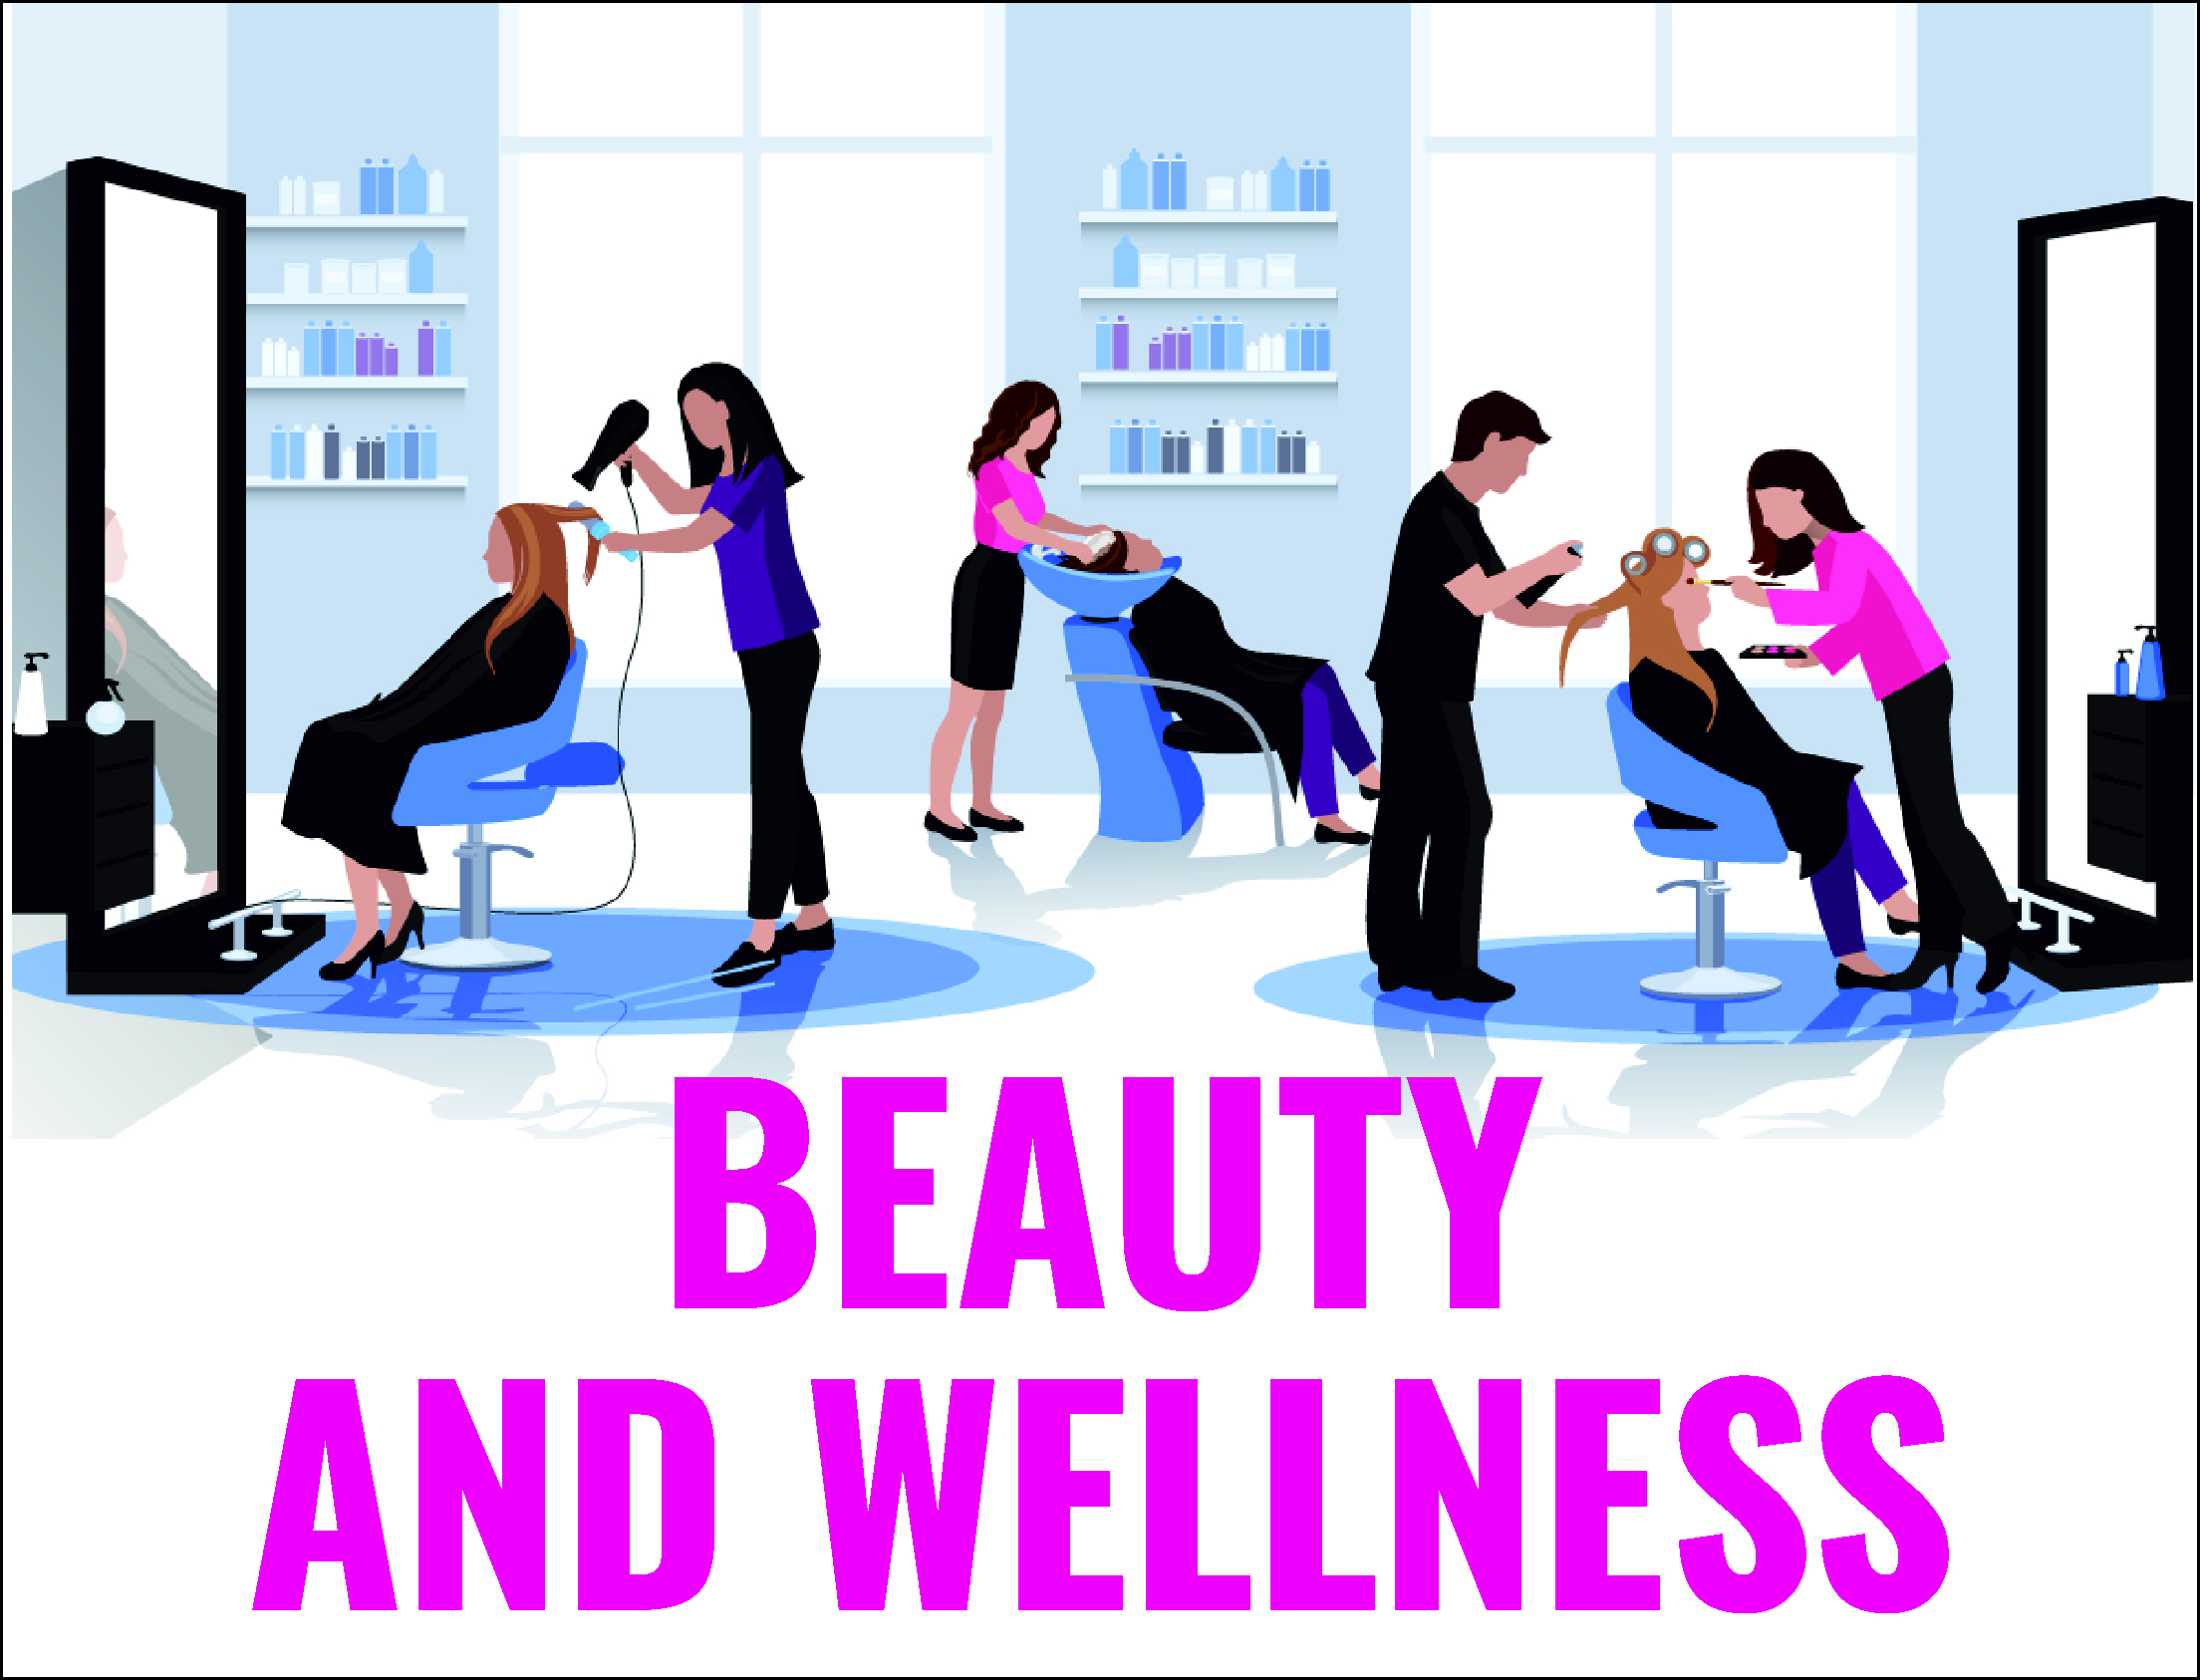 http://study.aisectonline.com/images/SubCategory/BEAUTY AND WELLNESS.png